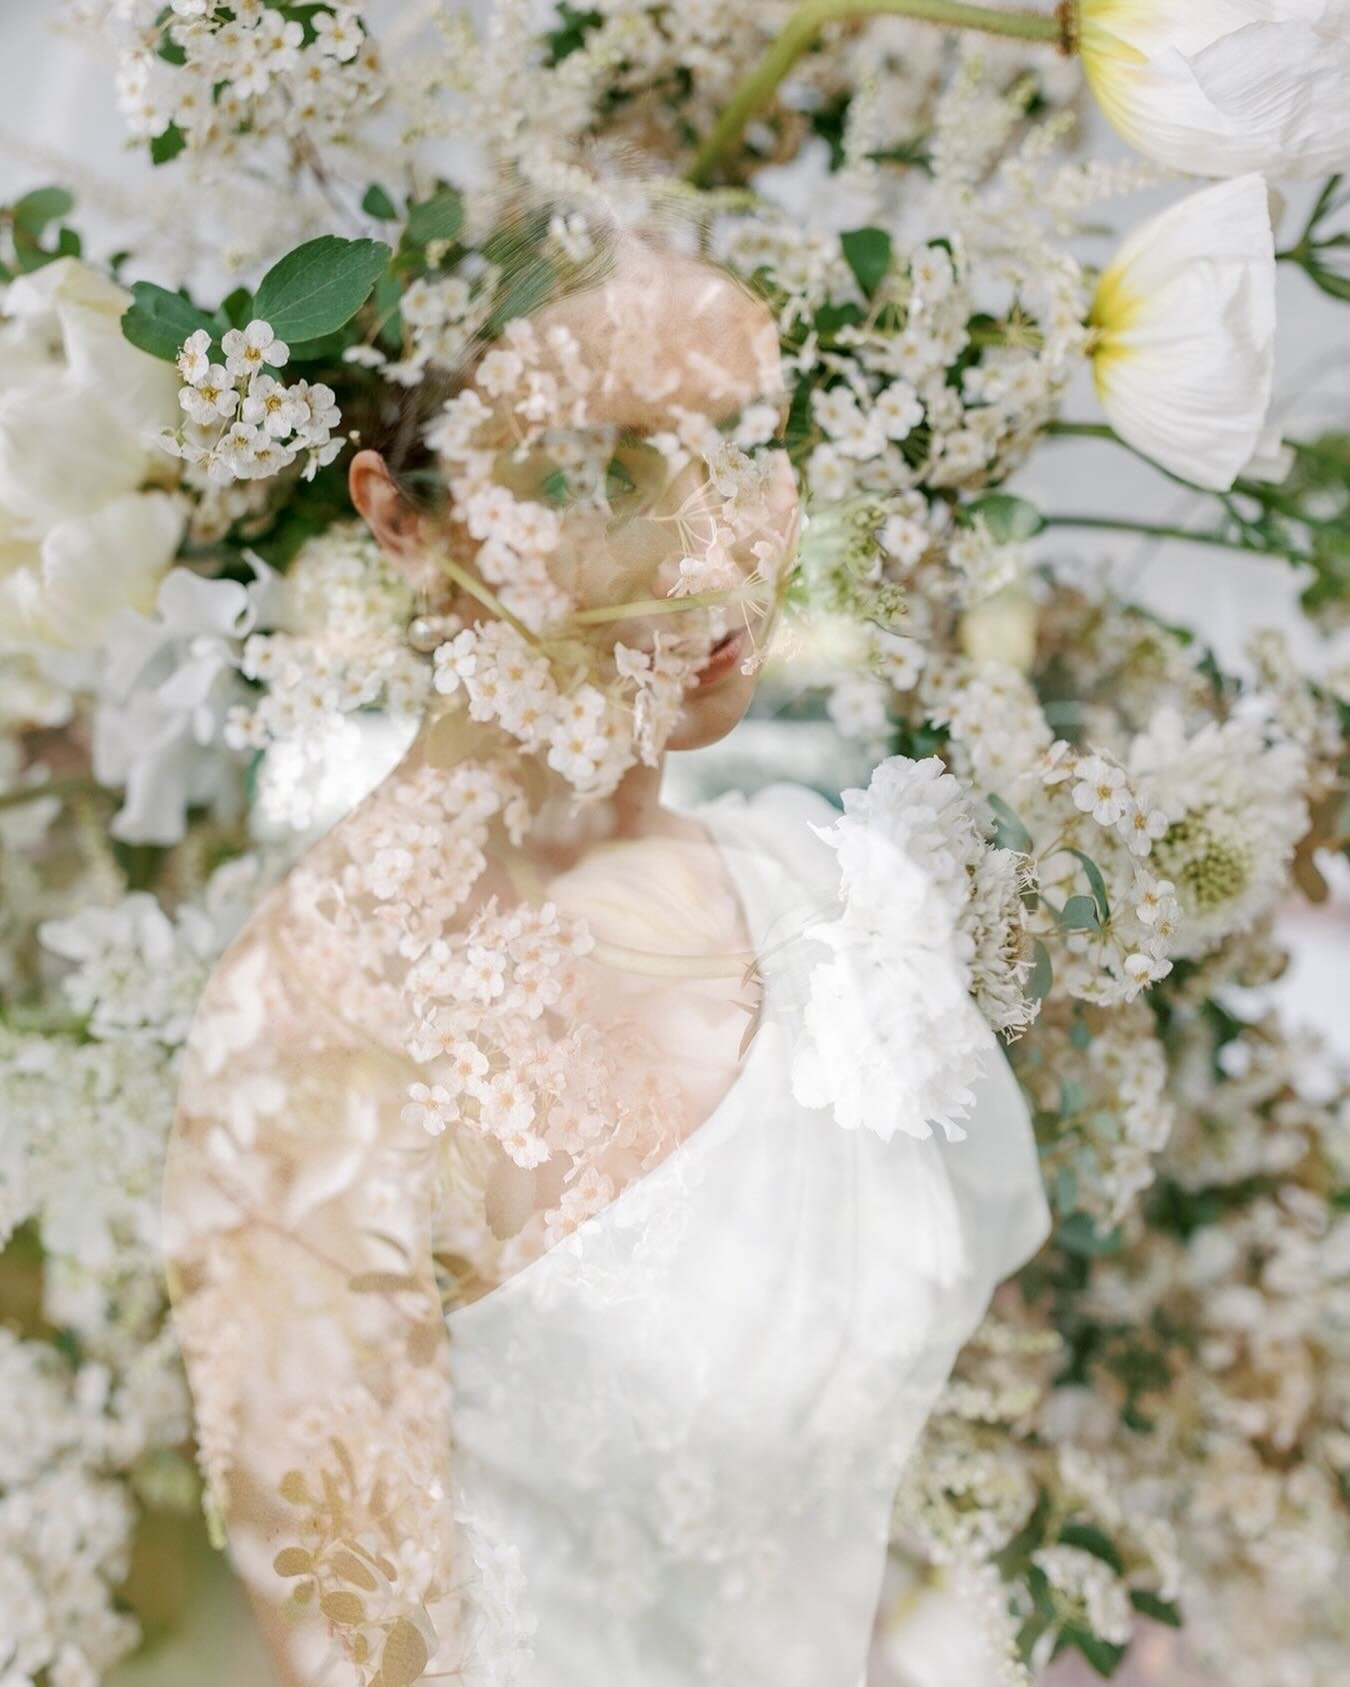 Obsessing over this double exposure from the most romantic, outdoor wedding in Virginia!
⠀⠀⠀⠀⠀⠀⠀⠀⠀
Photography: @marguliesandbrooks @leahmarguliesphotography @pshoots
Planning + Design: @nouvelleweddings @bri.in.baltimore @lynn_aaron
Videography: @al